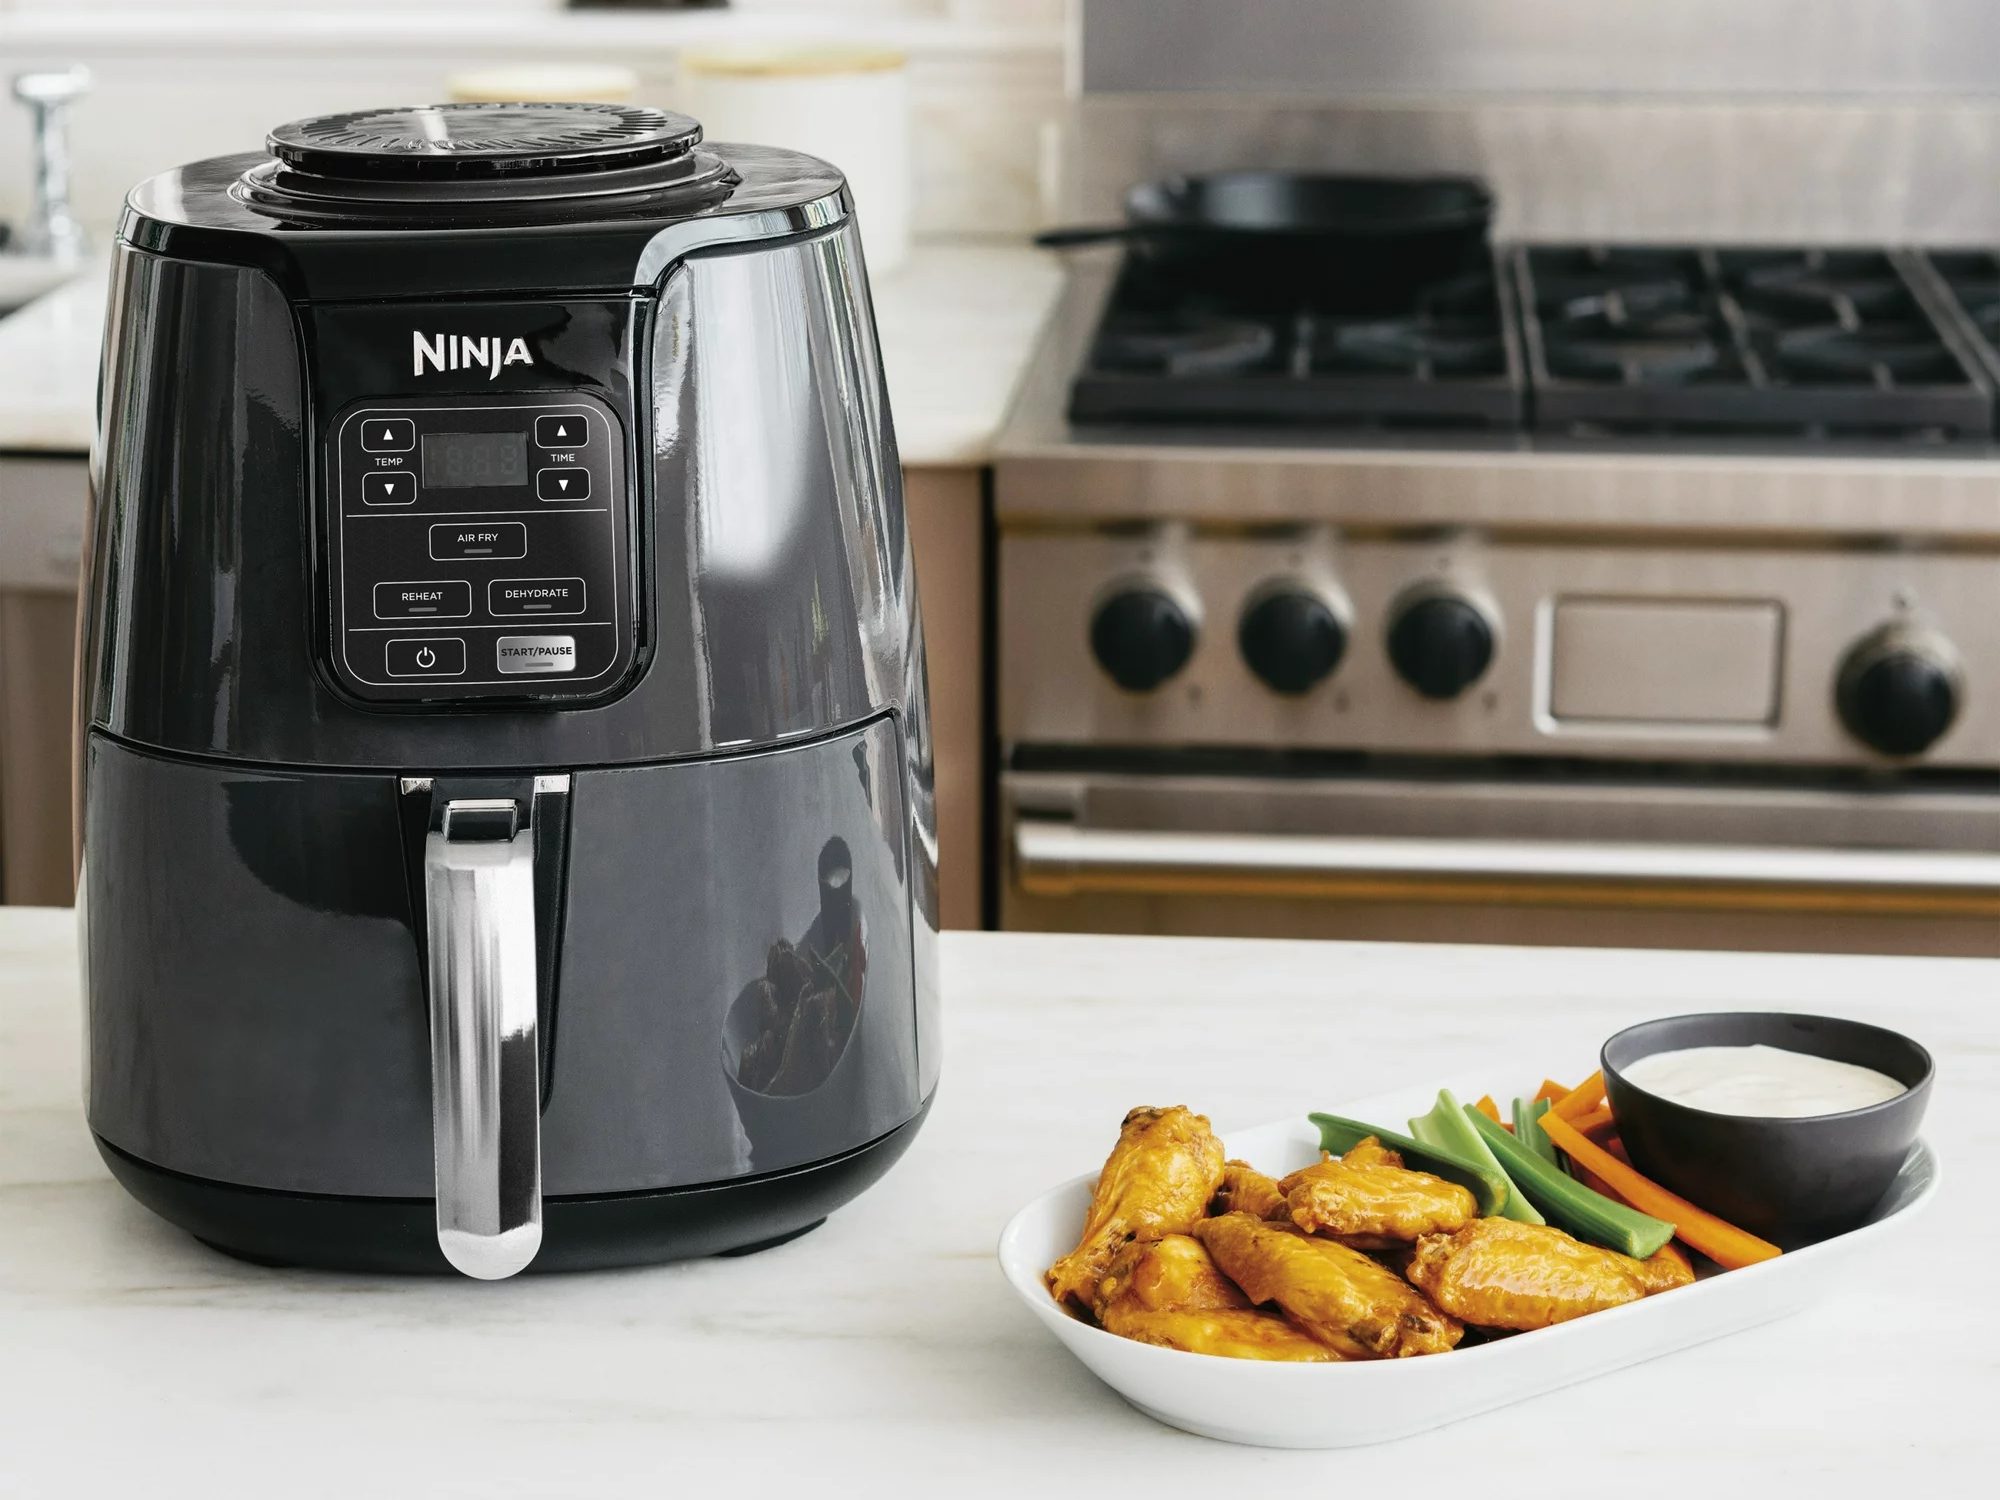 The Ninja 4QT Air Fryer next to a plate of food.